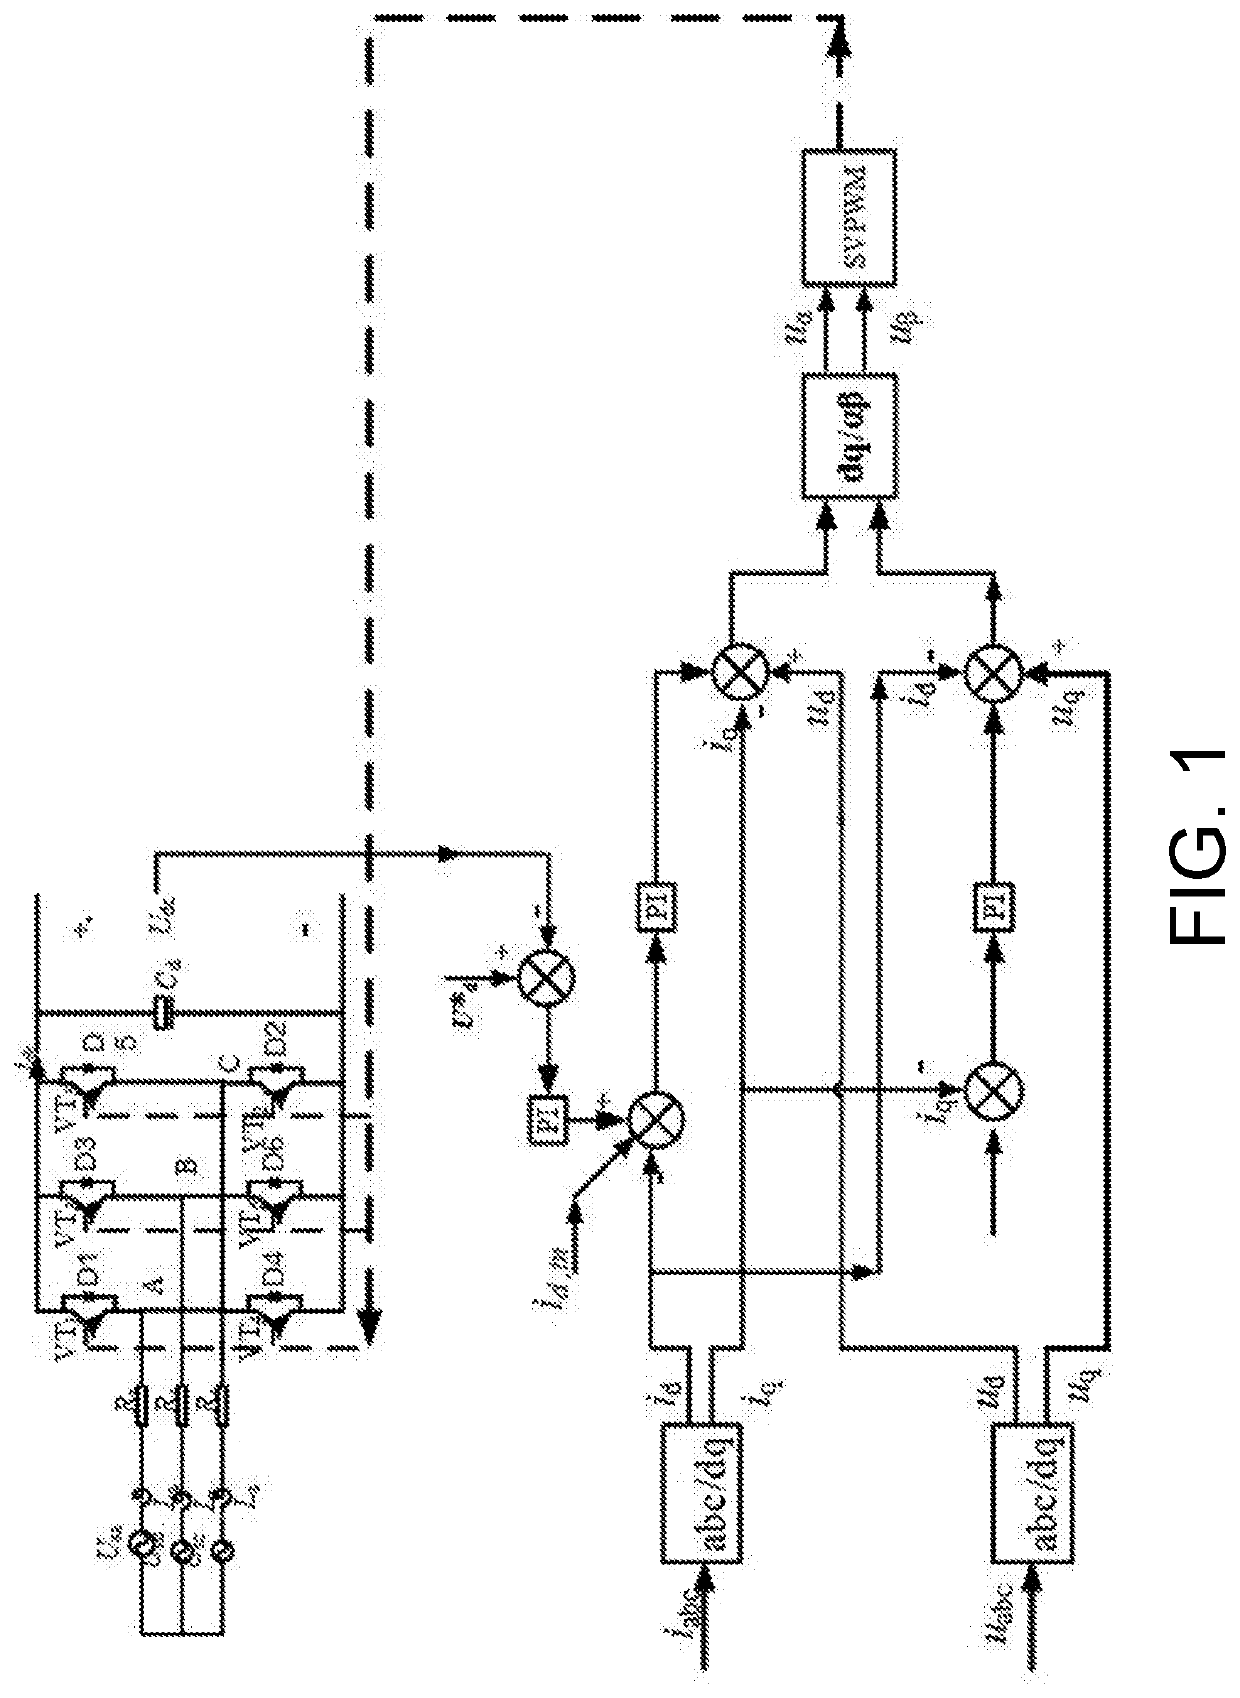 Power electronic circuit fault diagnosis method based on extremely randomized trees and stacked sparse auto-encoder algorithm